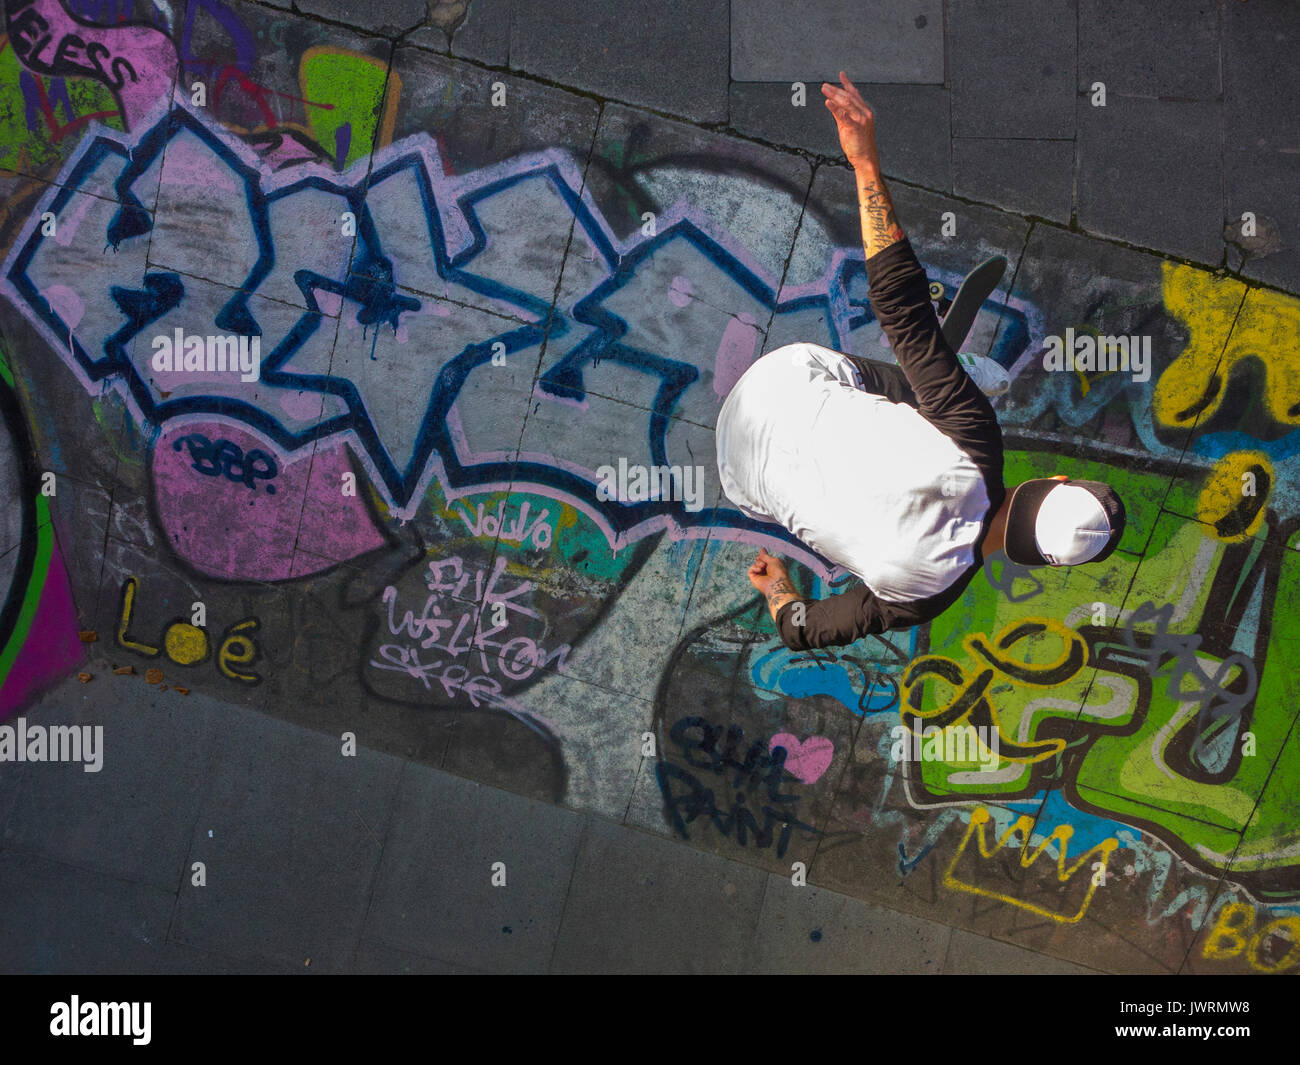 A skateboarder performs a trick, shot from above as an unusual angle Stock Photo